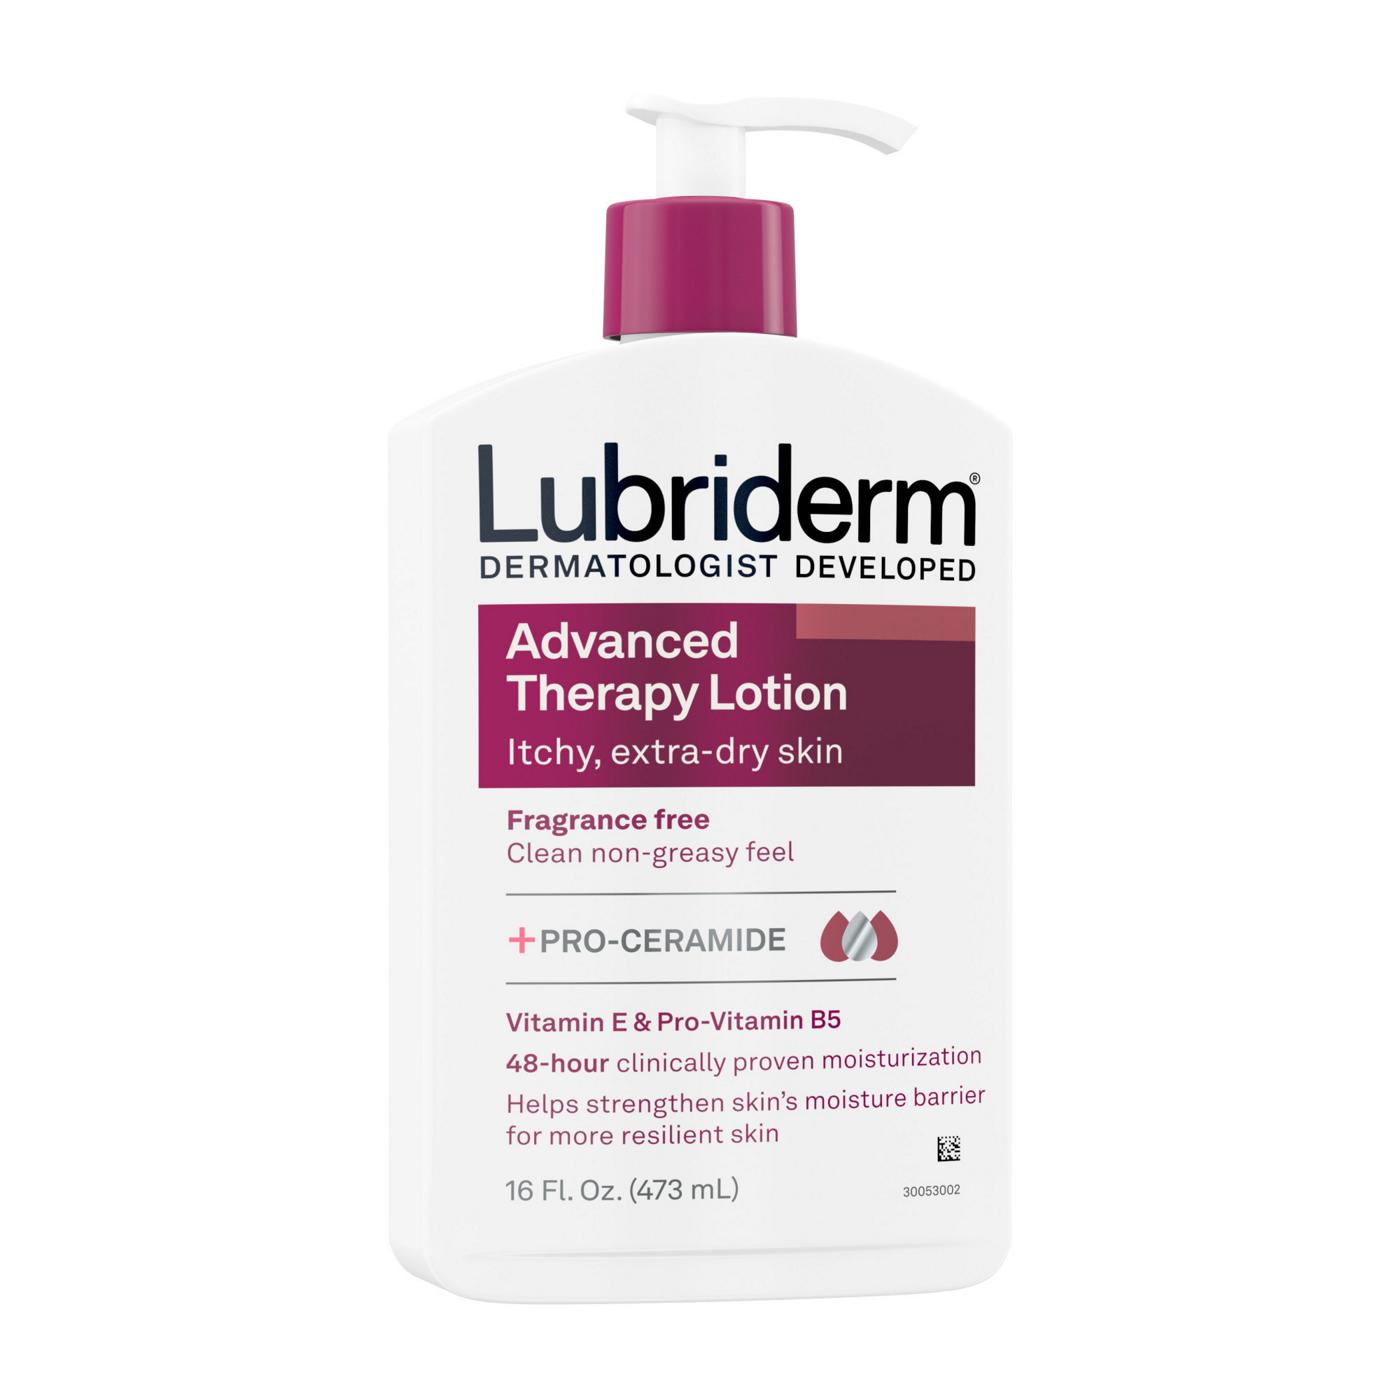 Lubriderm Advanced Therapy Lotion; image 2 of 9